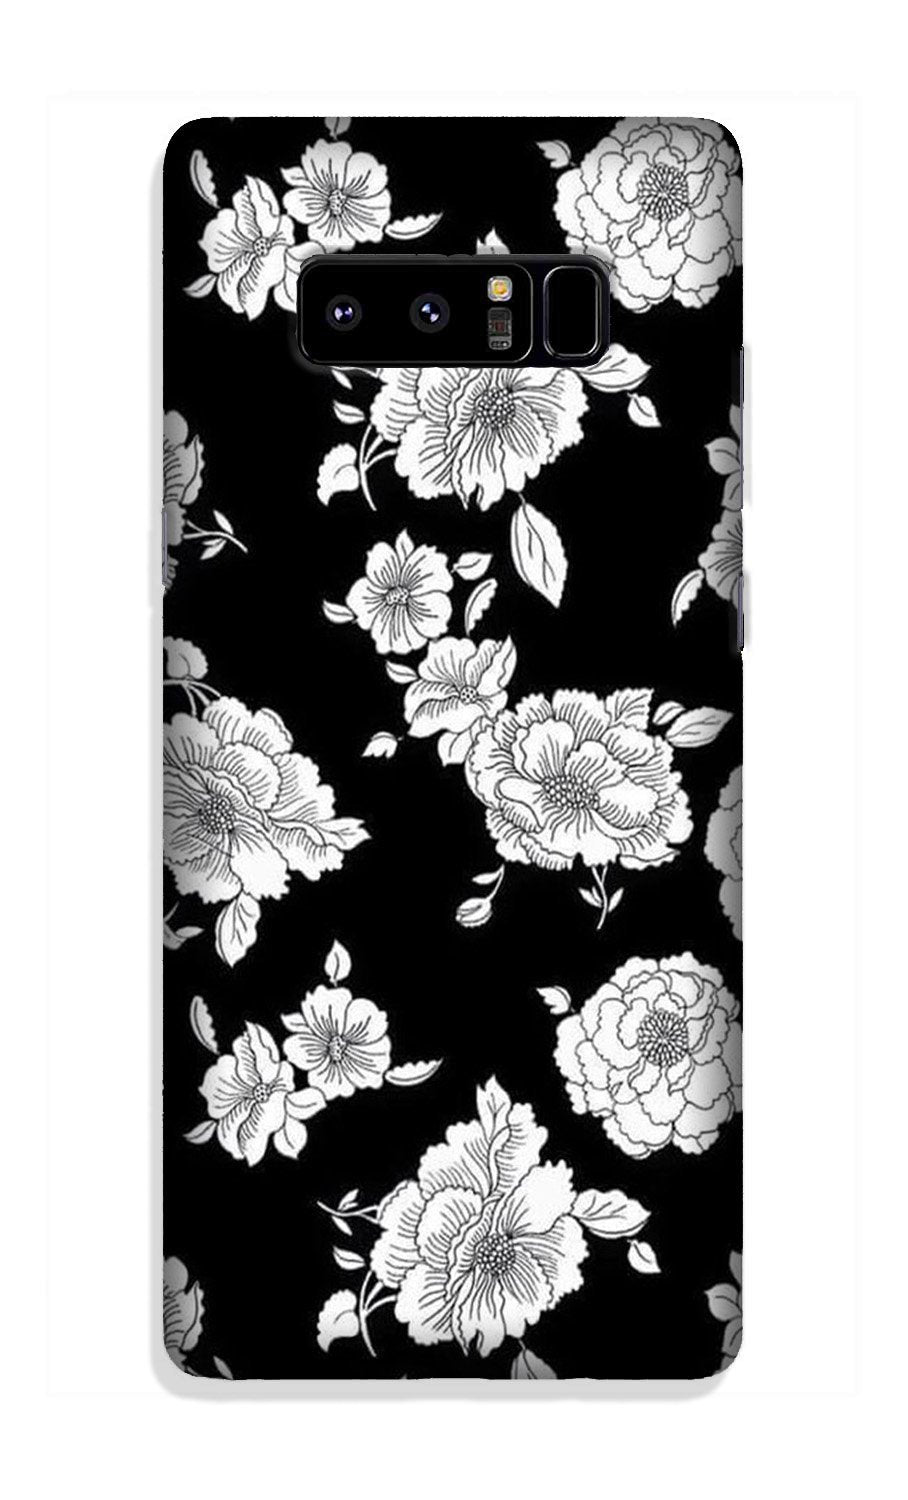 White flowers Black Background Case for Galaxy Note 8